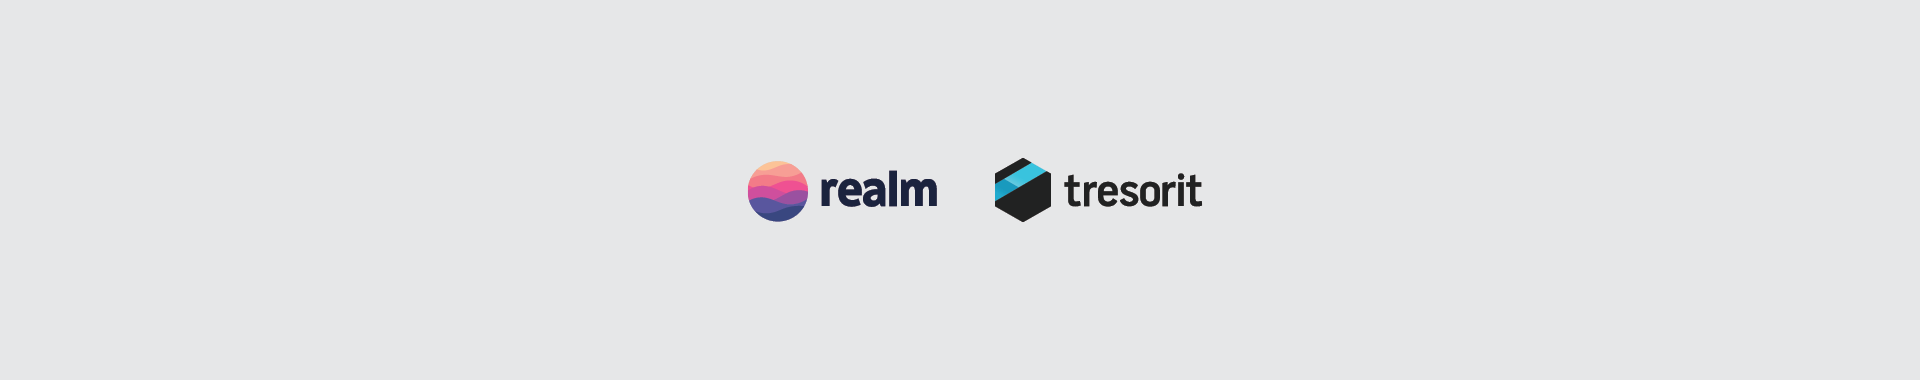 Realm + ZeroKit: Introducing end-to-end encryption to realtime collaboration apps